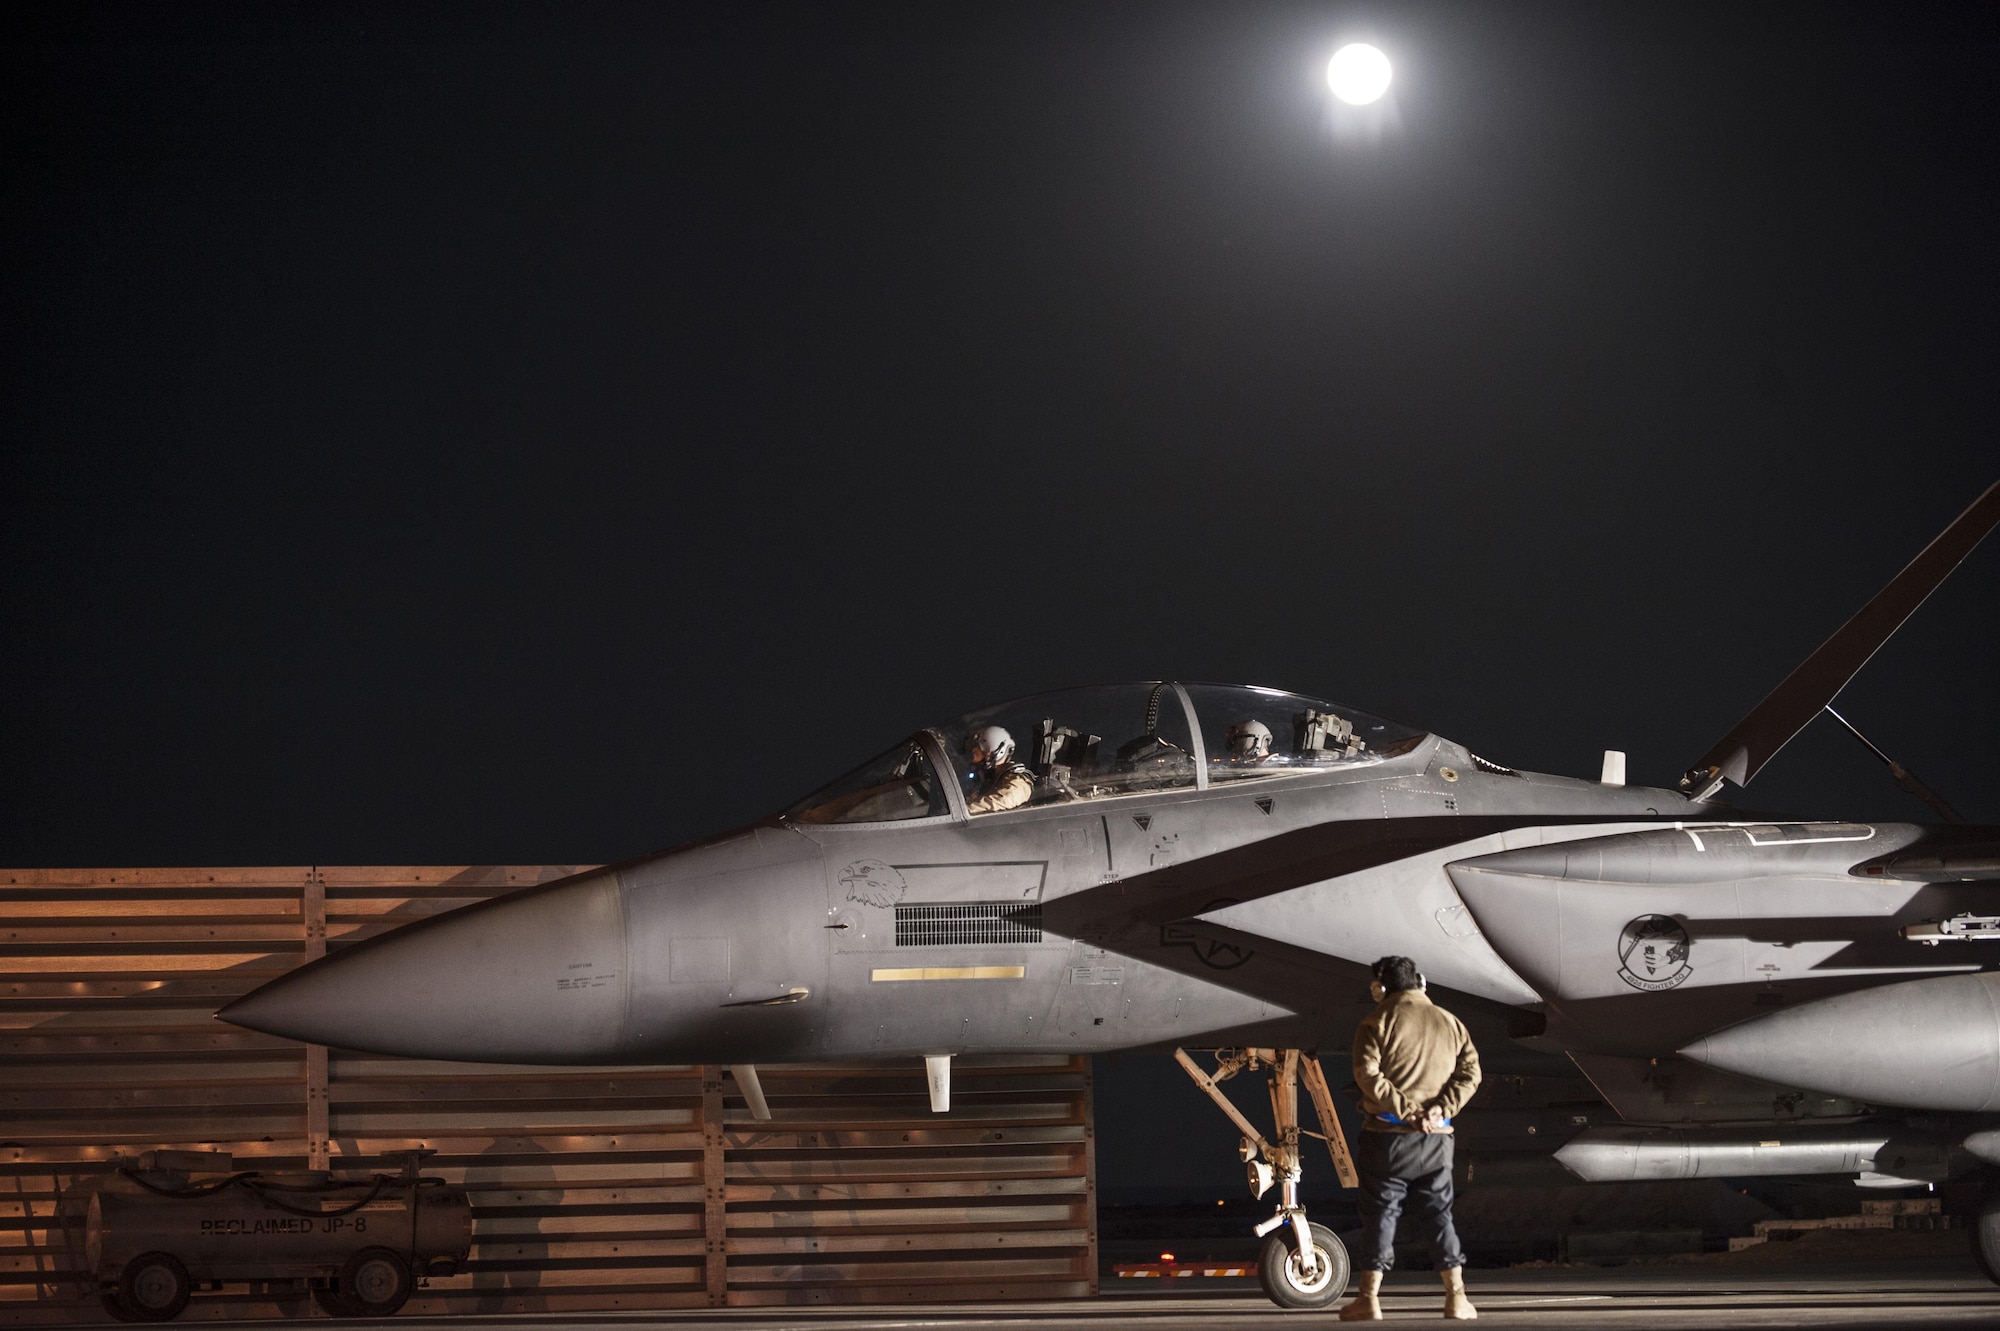 Pilots assigned to the 492nd Expeditionary Fighter Squadron and maintainers from the 332nd Expeditionary Maintenance Squadron finish pre-flight checks on a F-15E Strike Eagle prior to an early-morning takeoff October 4, 2017, at an undisclosed location in Southwest Asia. The 492nd EFS is returning to their home station after six months of relentless strikes against Islamic State forces in the region.